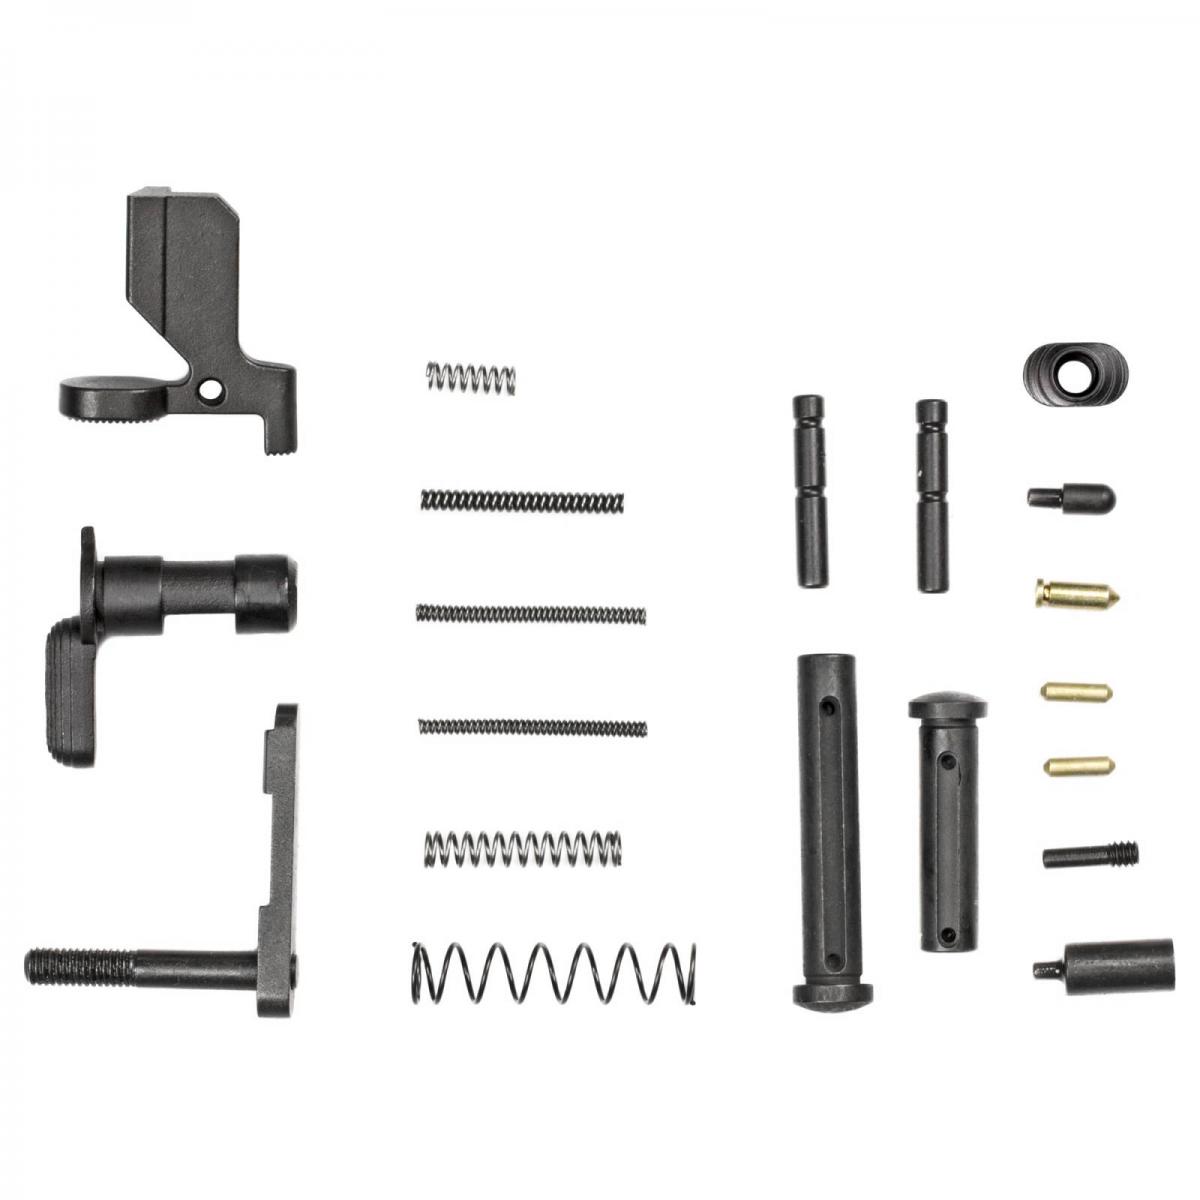 Luth-AR 308 Lower Parts Kit